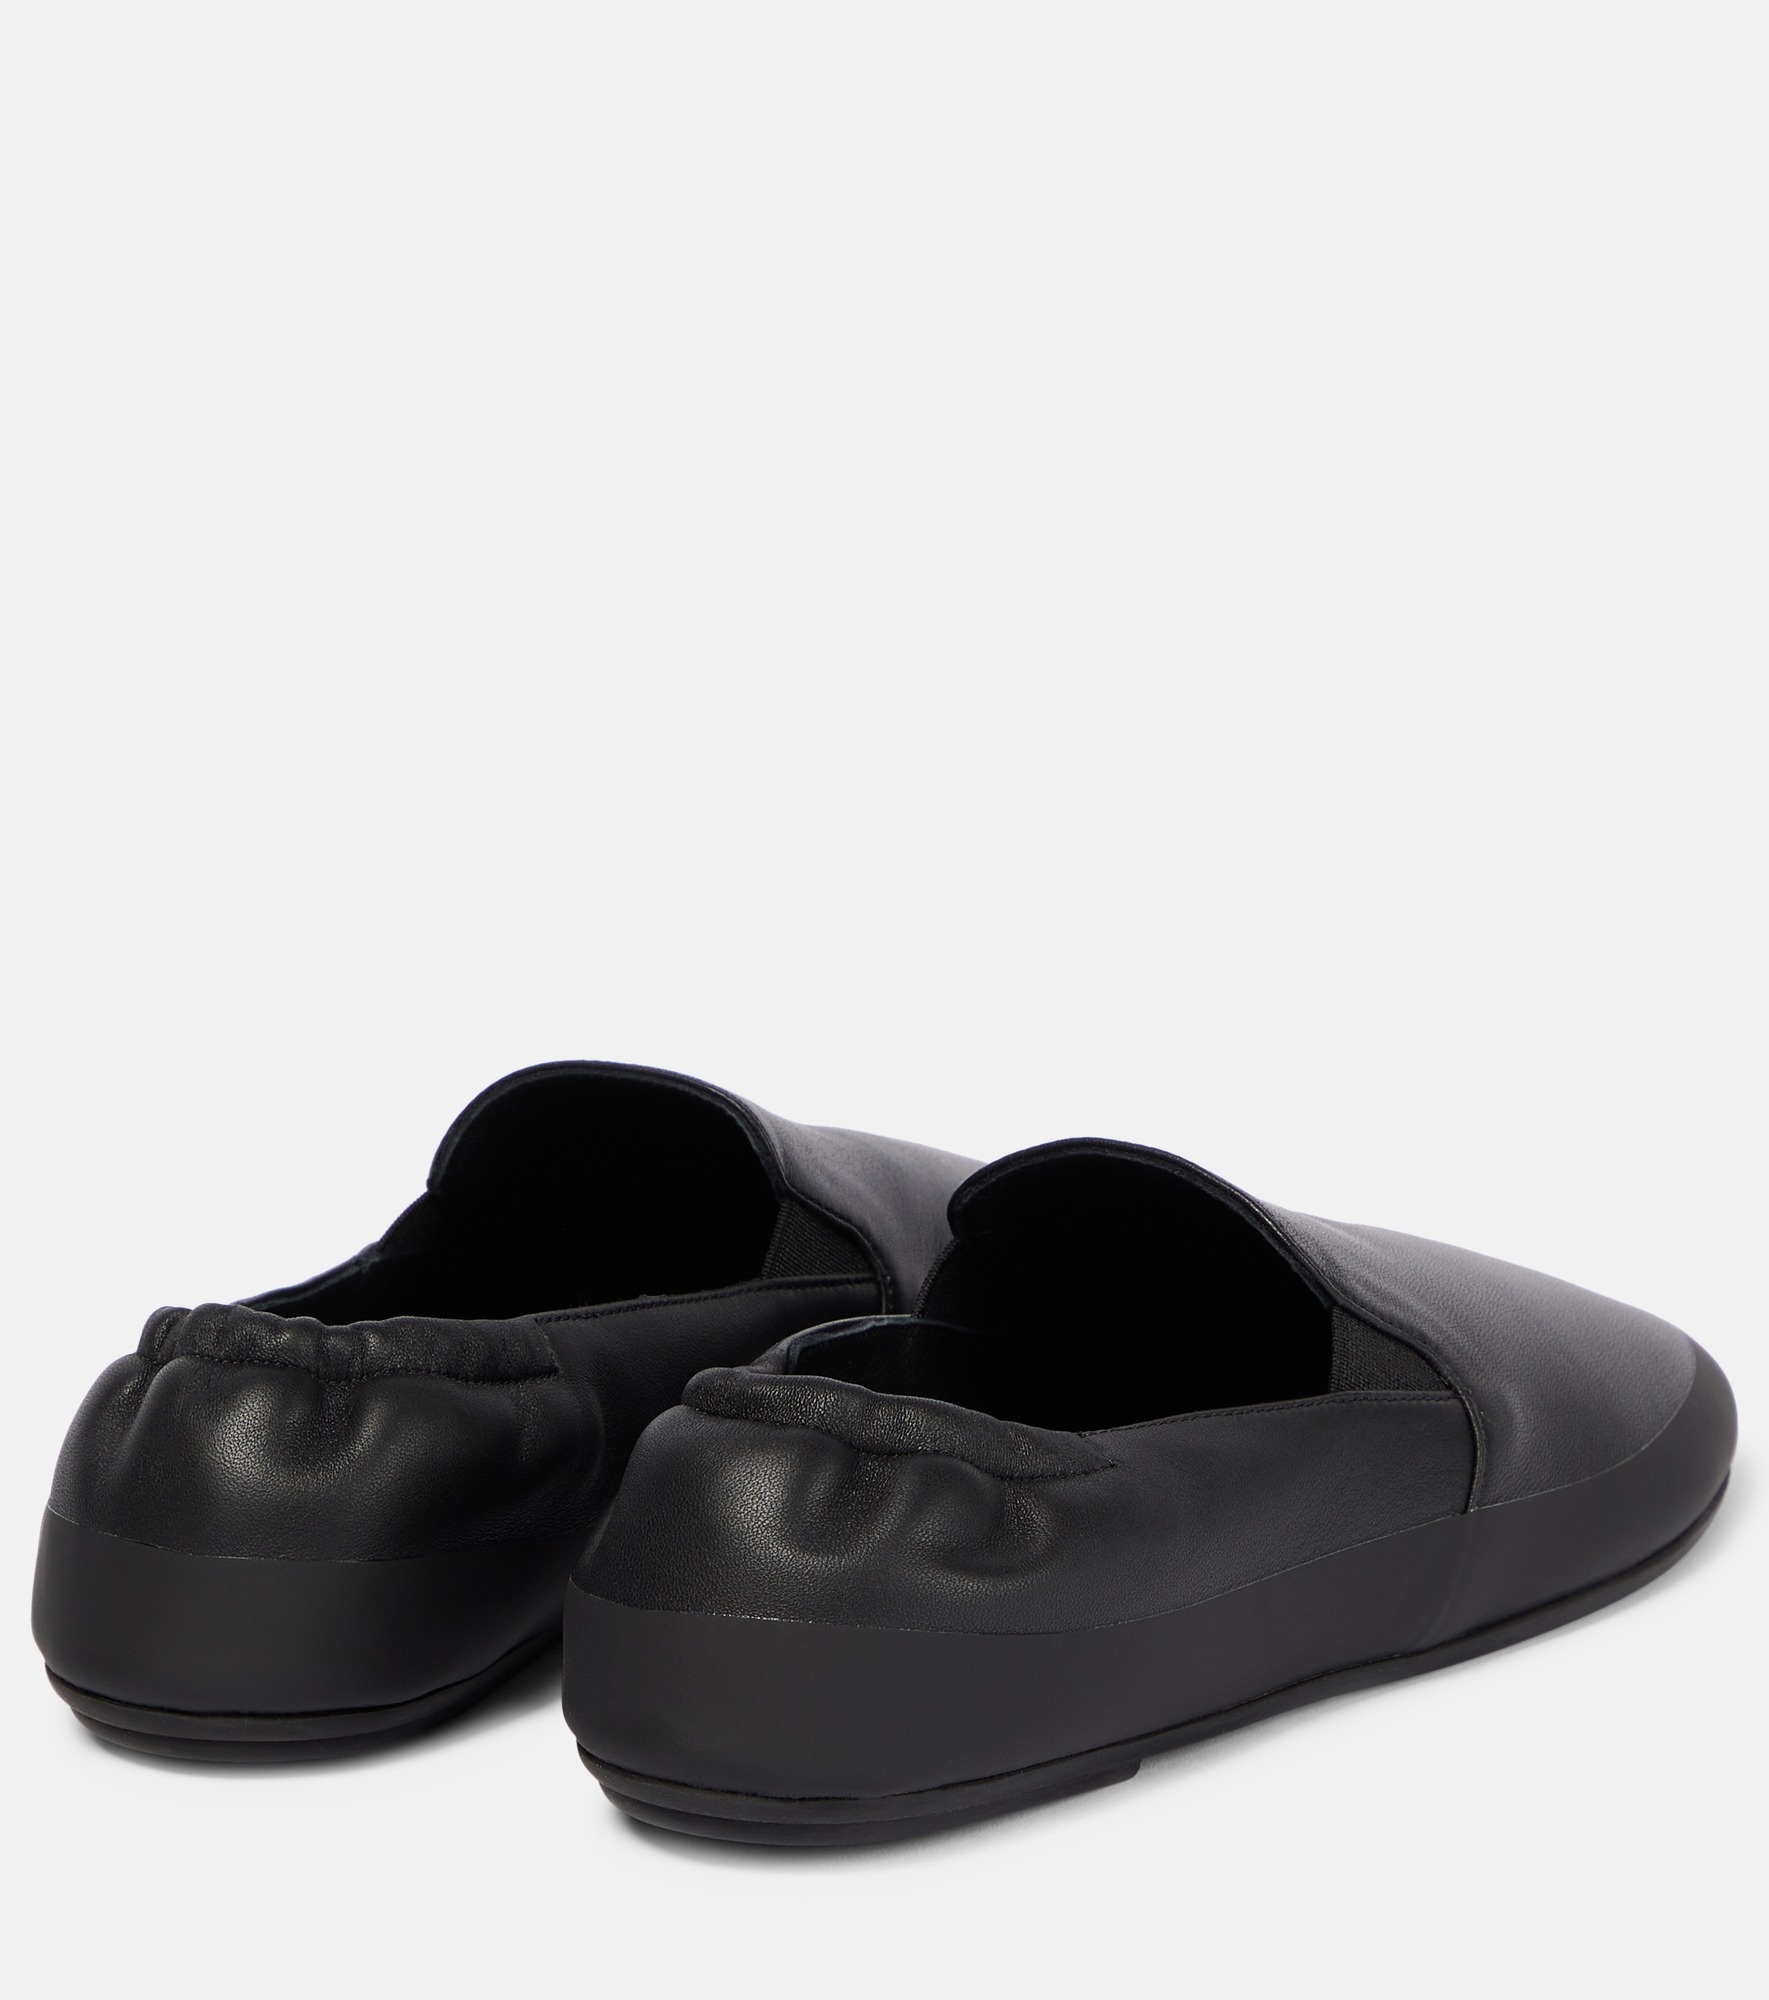 Tech leather loafers - 3